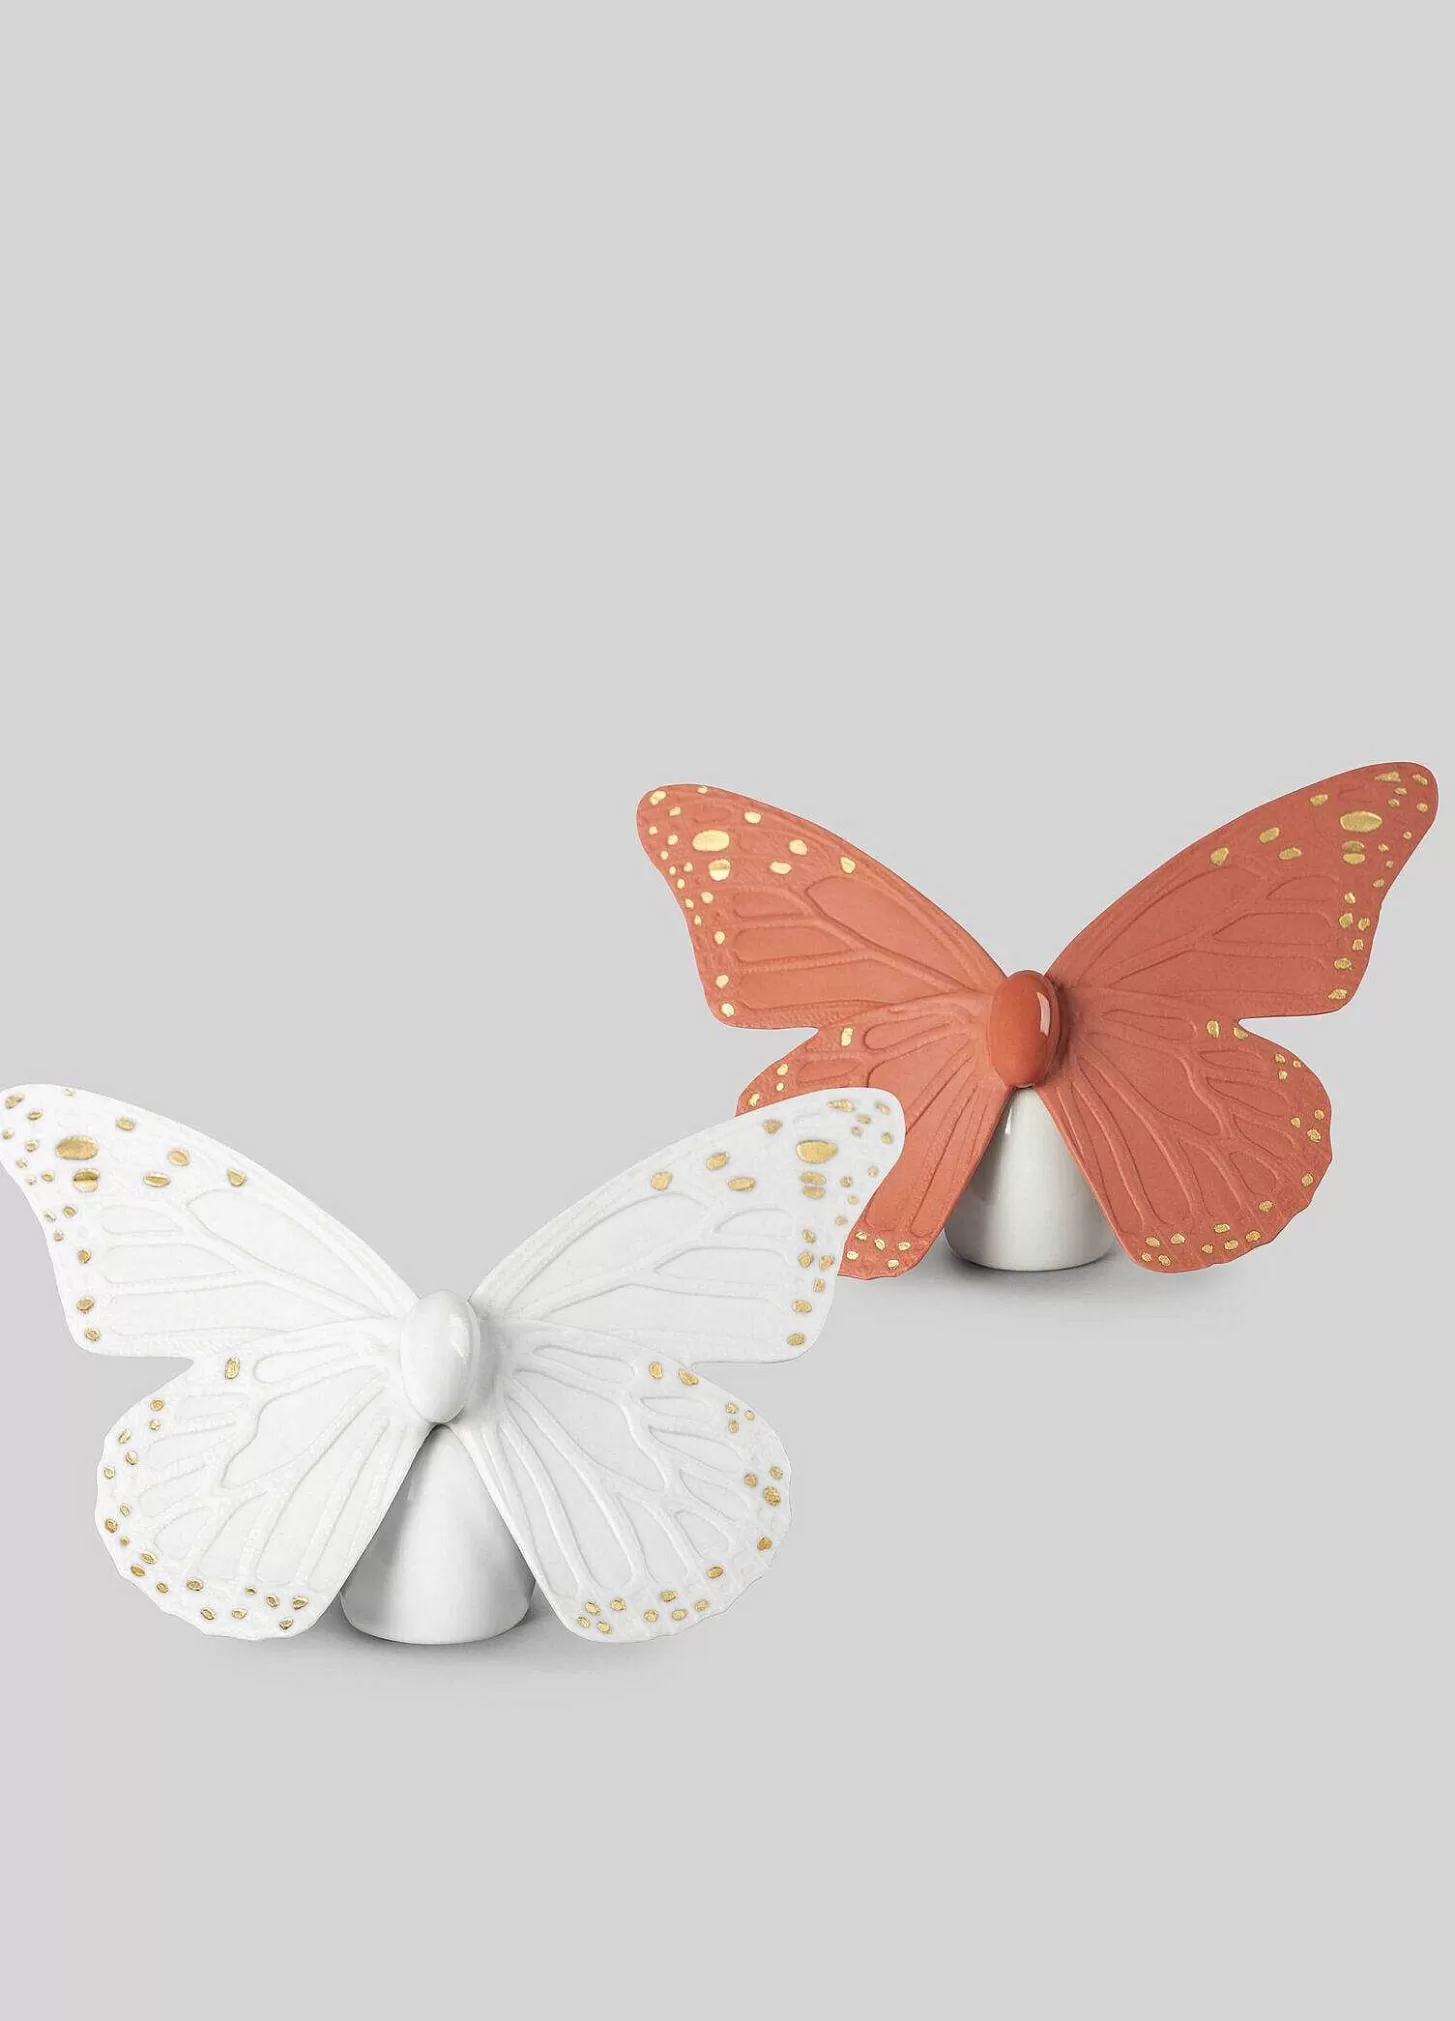 Lladró Butterfly Figurine. Golden Luster & White^ Gifts